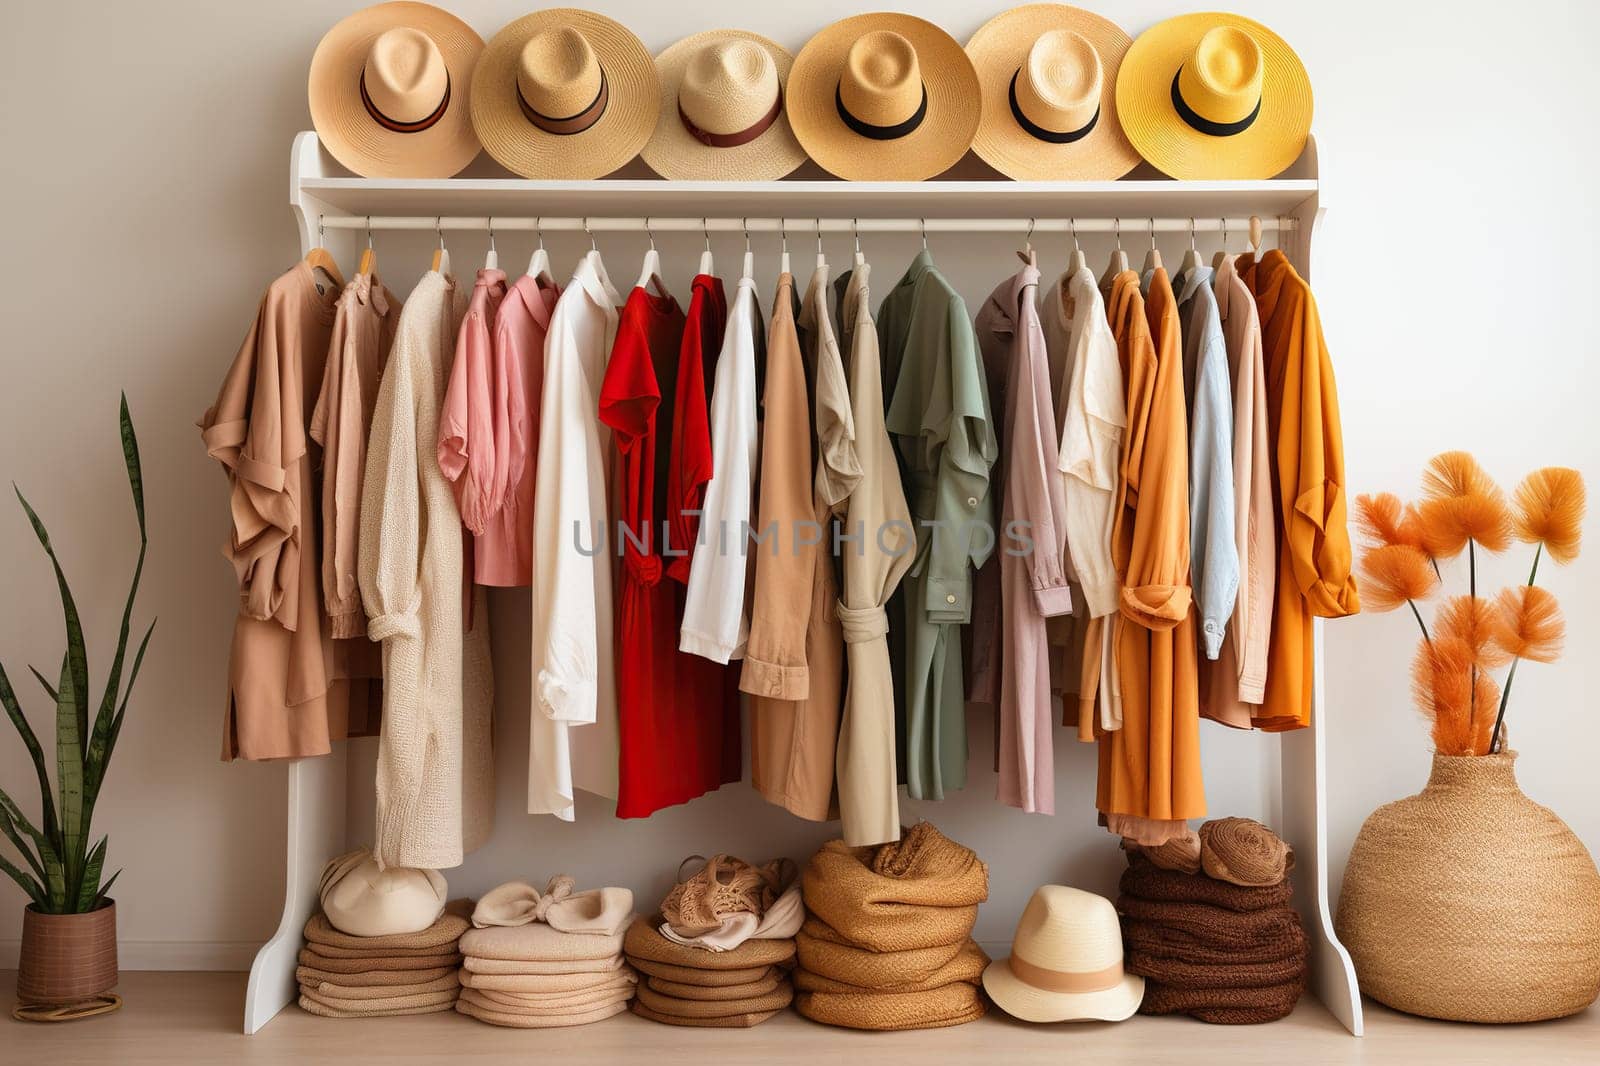 Women's wardrobe, clothes in neutral light colors on hangers. Concept: organizing order in a wardrobe or pantry. Shelf with hangers and hats. Generated by artificial intelligence by Vovmar